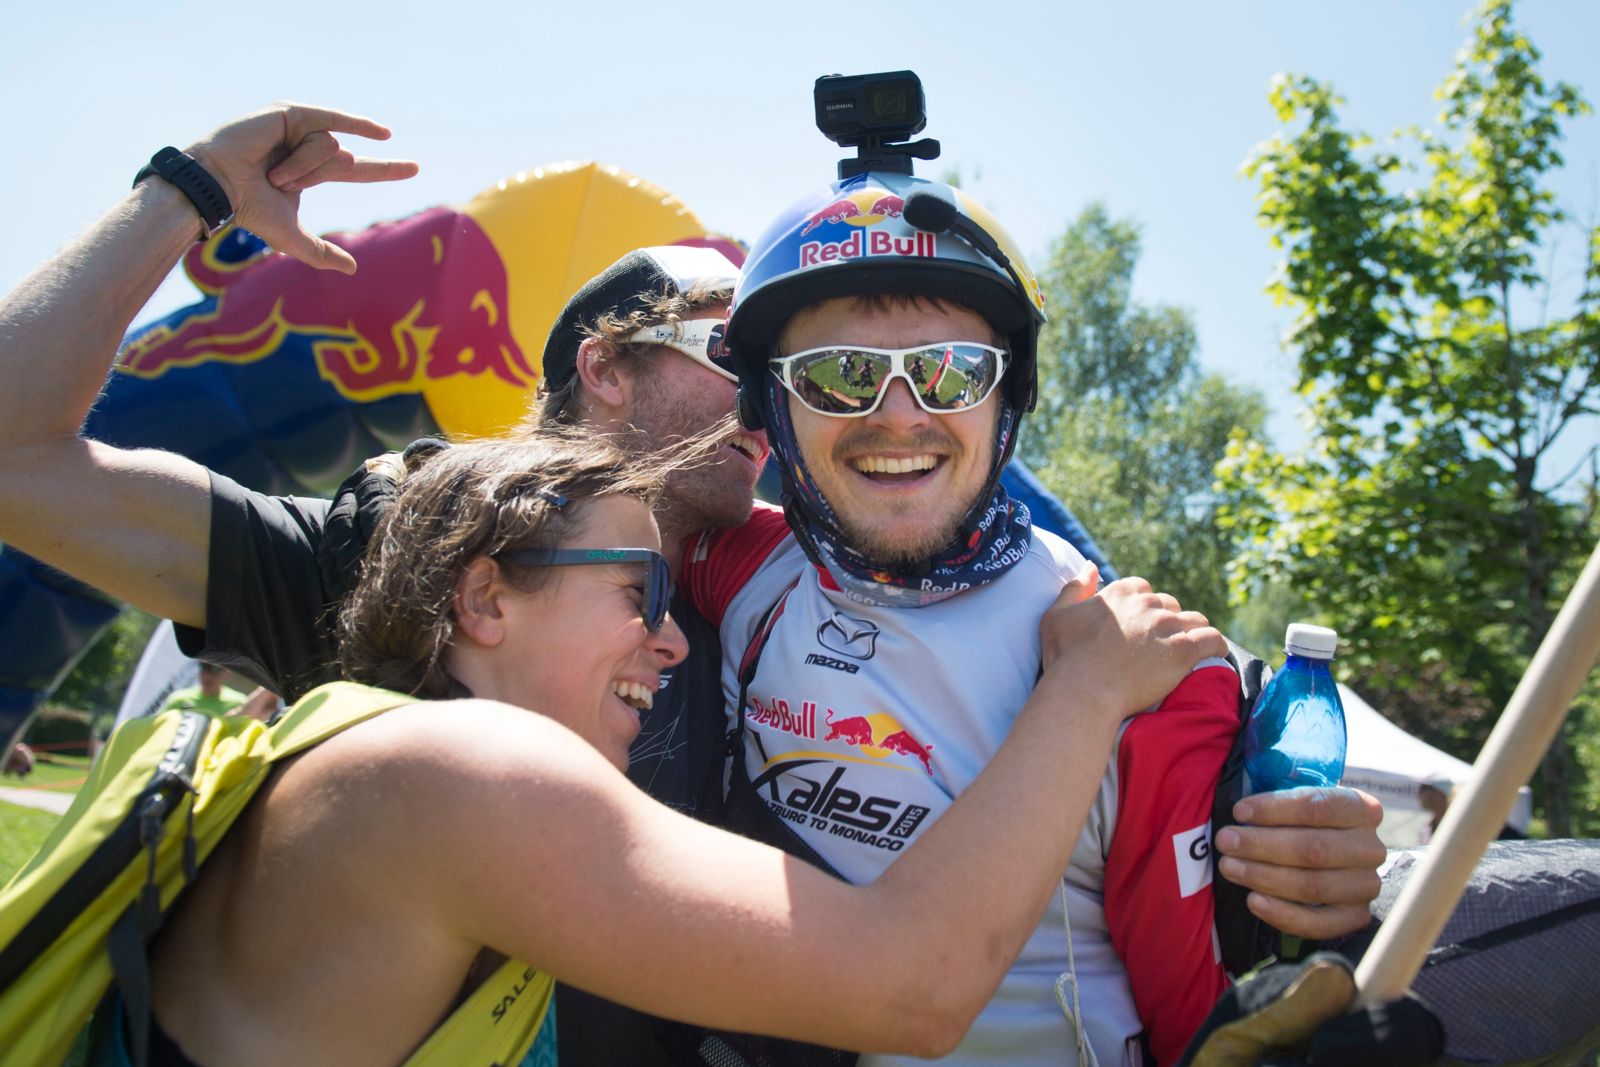 Smiles all around as Paul Guschlbauer (AUT1) is embraced by fans after landing in Fuschl am See. Guschlbauer snuck past Aaron Durogati (ITA) close to the finish to win the race.